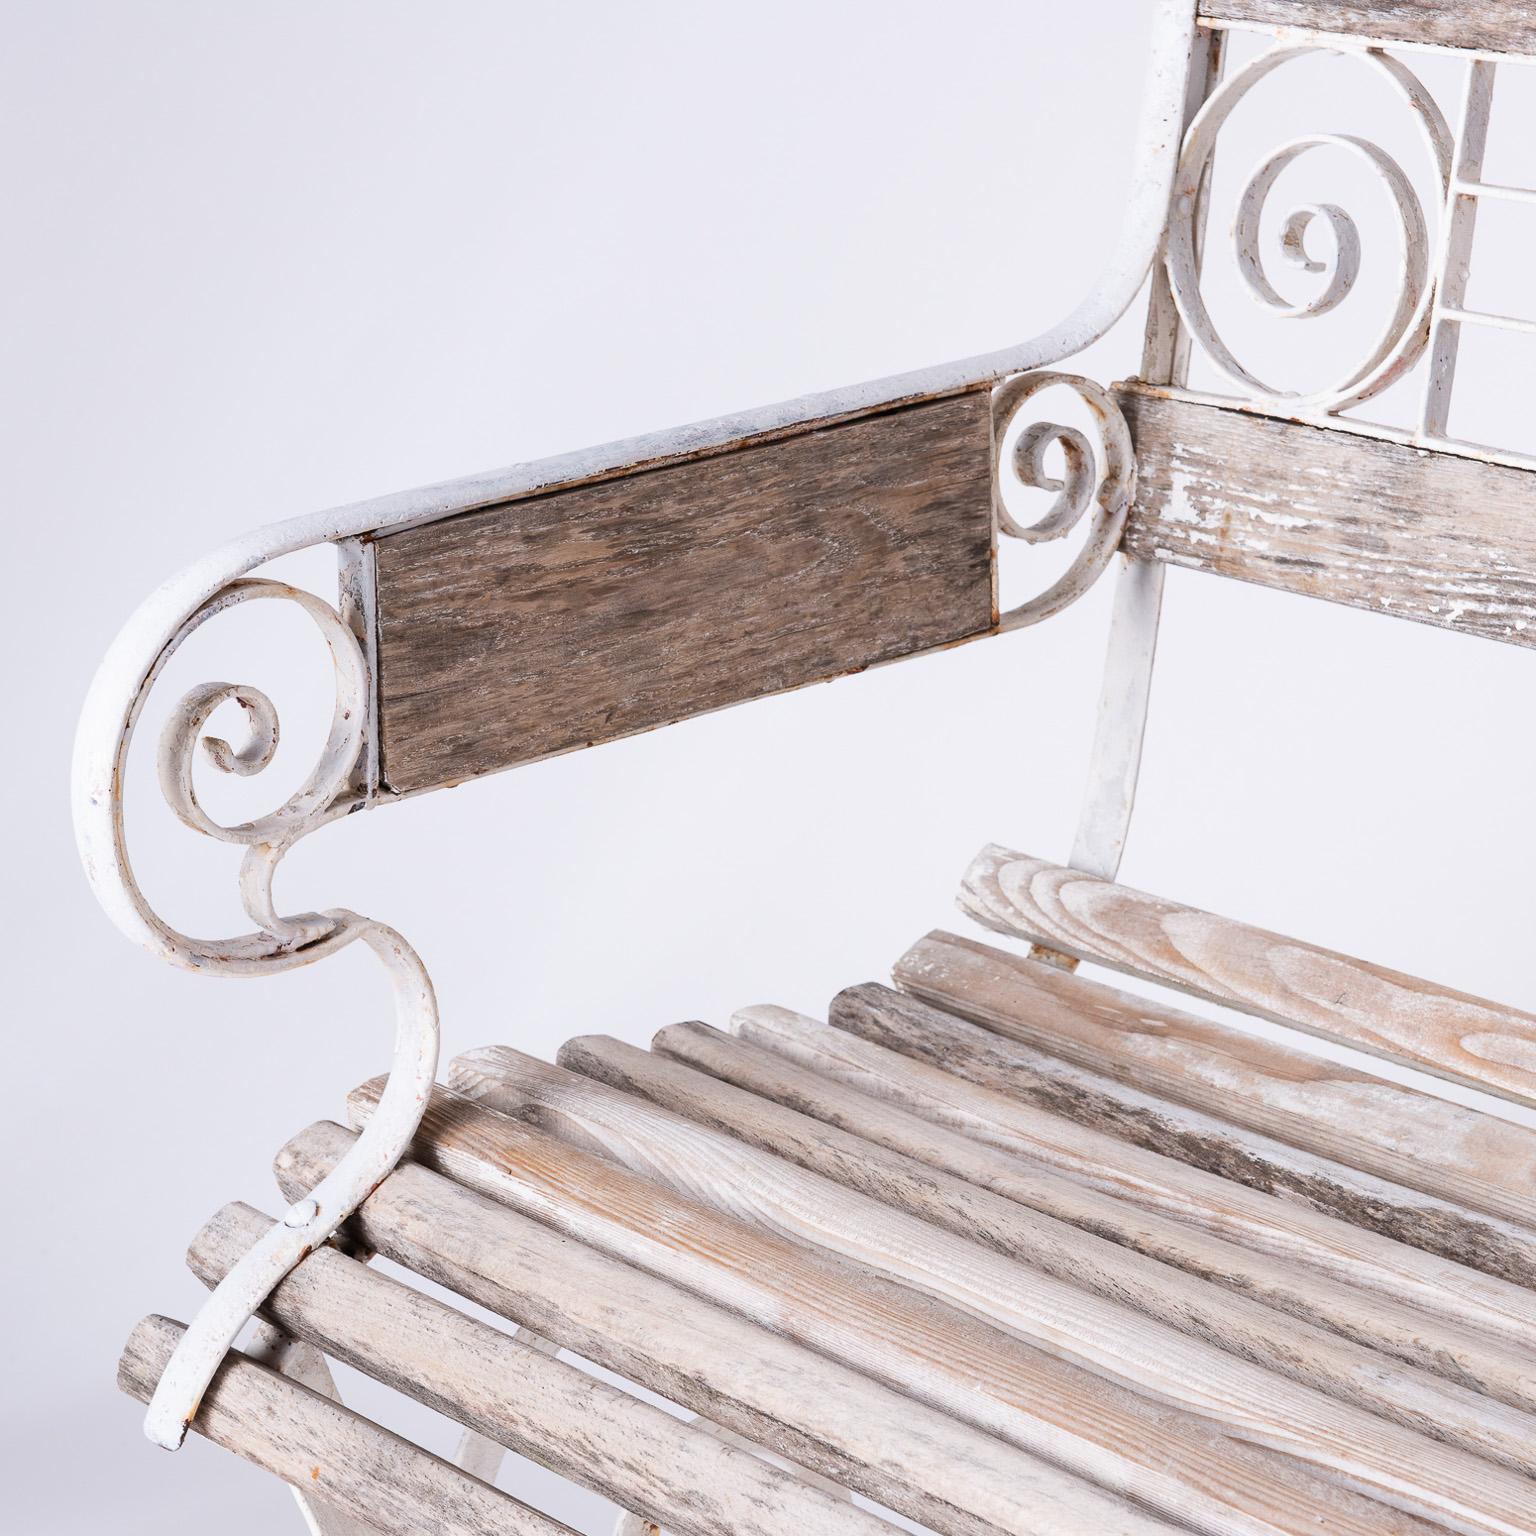 20th Century French Wood and Wrought Iron Garden Bench, circa 1900